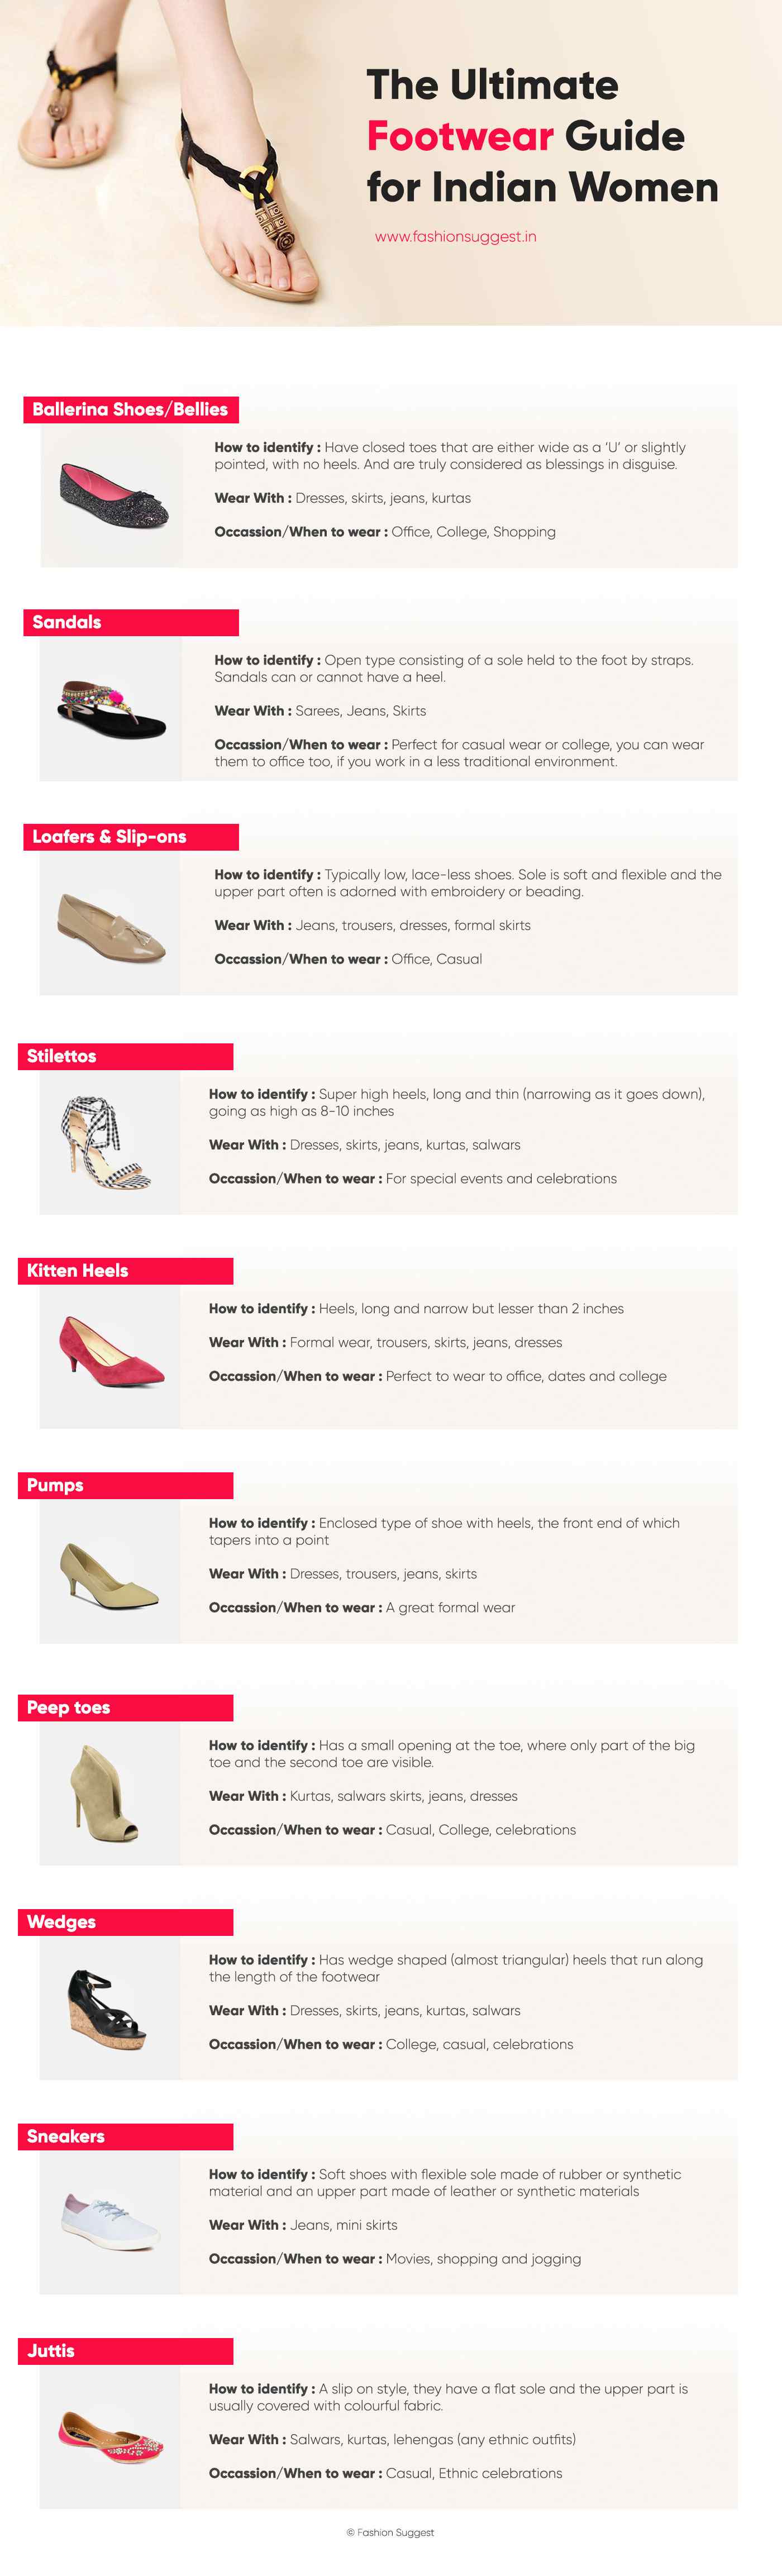 Footwear guide for Indian women infographic